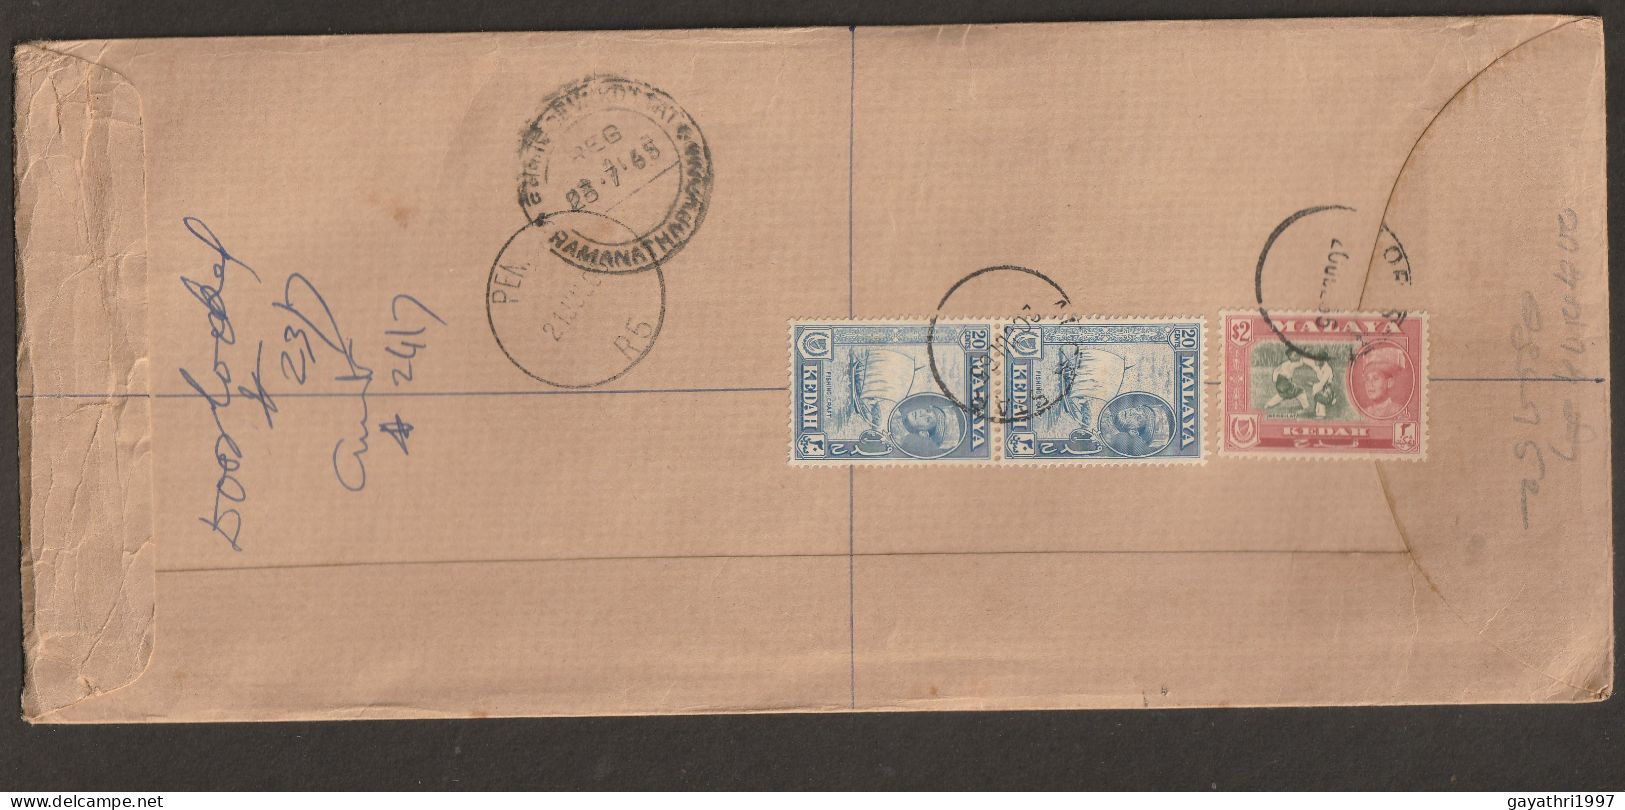 Malaya 1963 Malaya Stamp And Kedah Stamp Combined Used From Malaya To India Long Cover High Value Stamp(L18) - Kedah